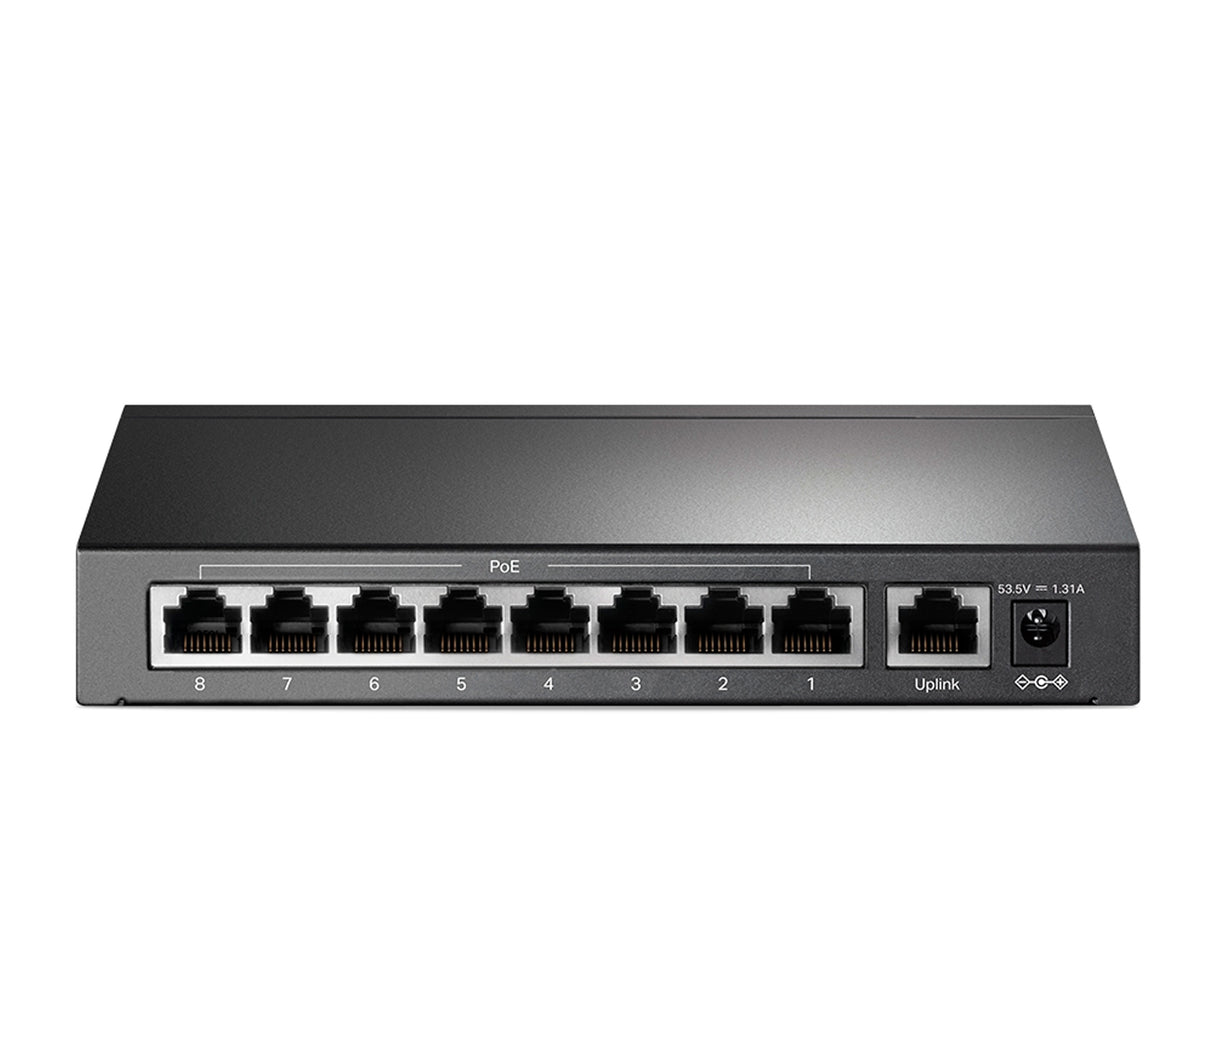 Switch 9-Pts 10/100m & 8-Ptos Poe+ Tl-Sf1009p Tp-link